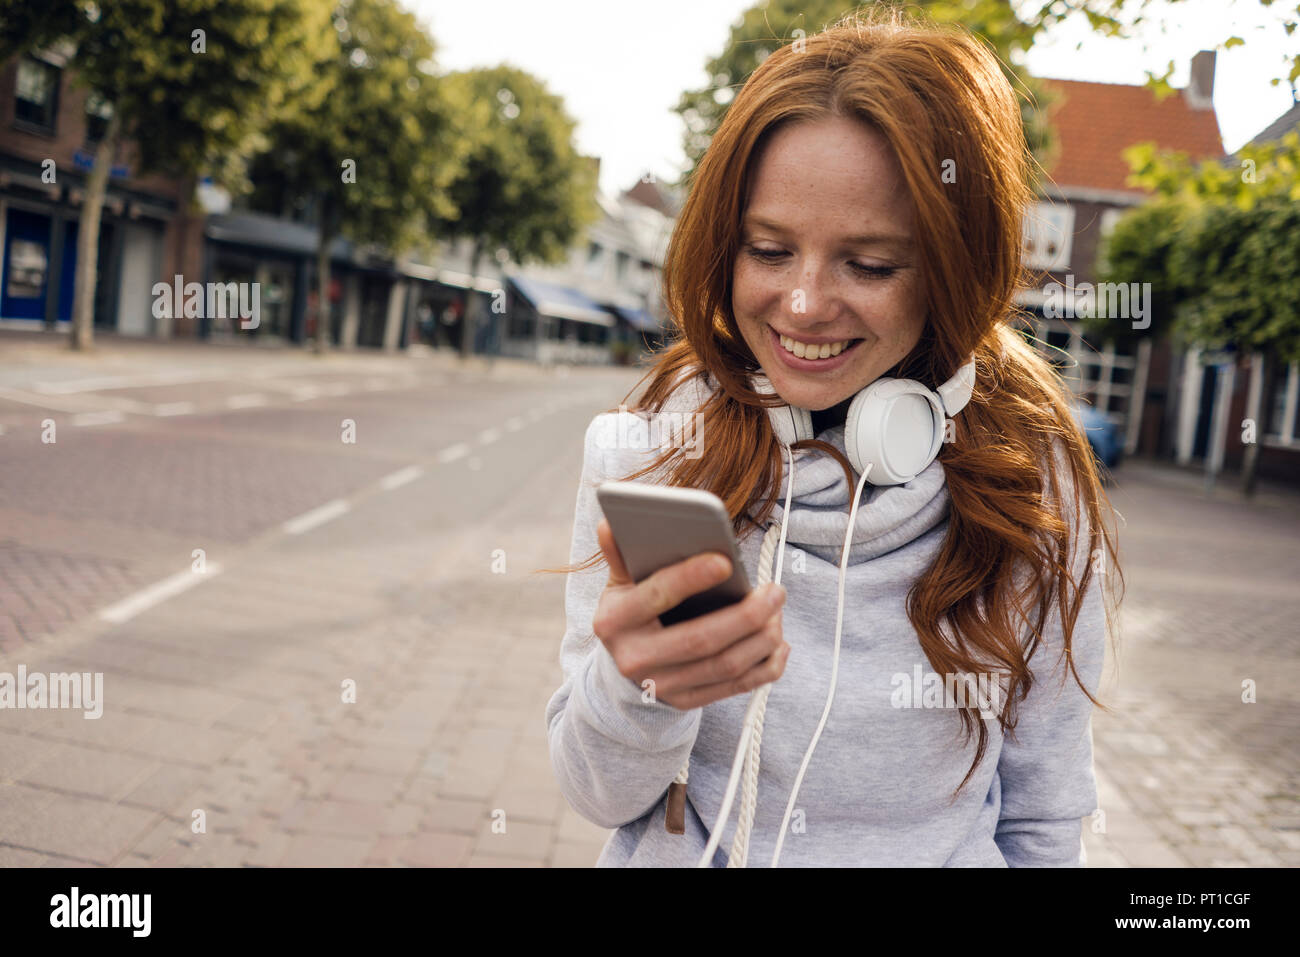 Redheaded woman using headphones and smartphone in the city Stock Photo